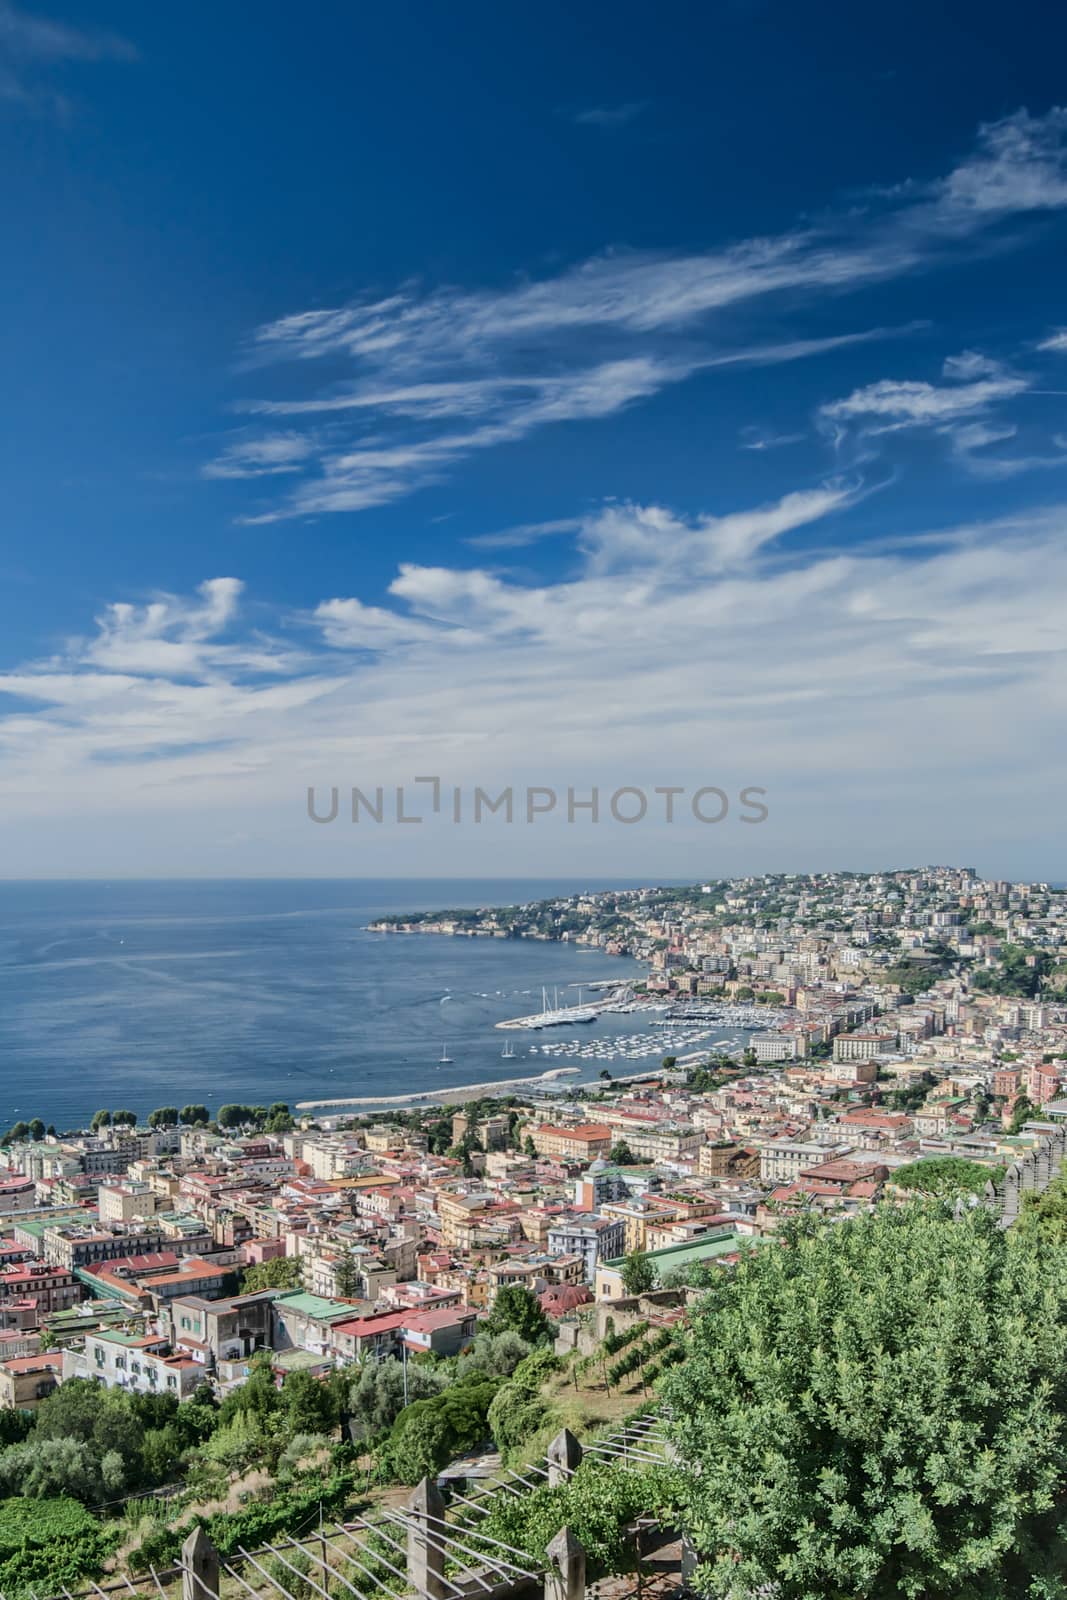 View of Posillipo and Chiaia, Naples, from the hills on a sunny day